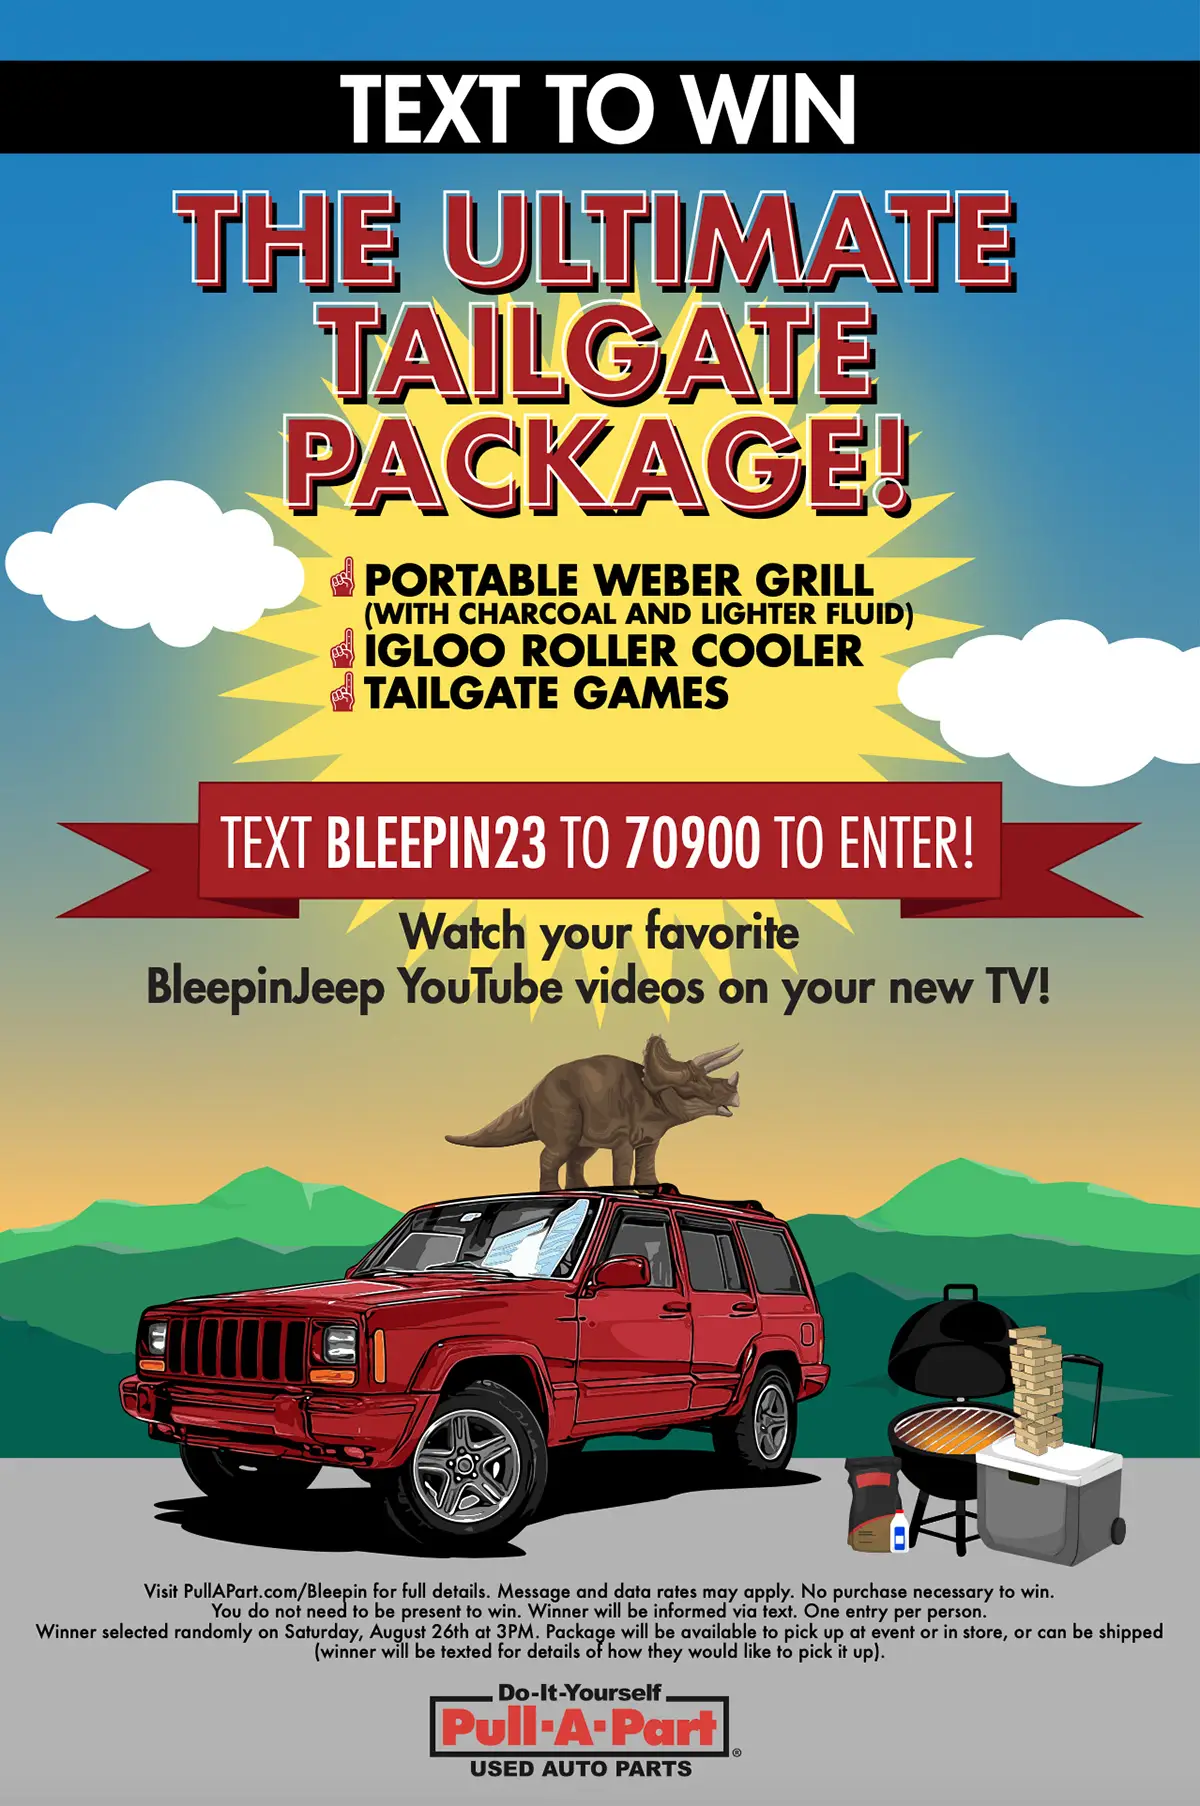 Win the Ultimate Tailgate Package courtesy of Pull-A-Part